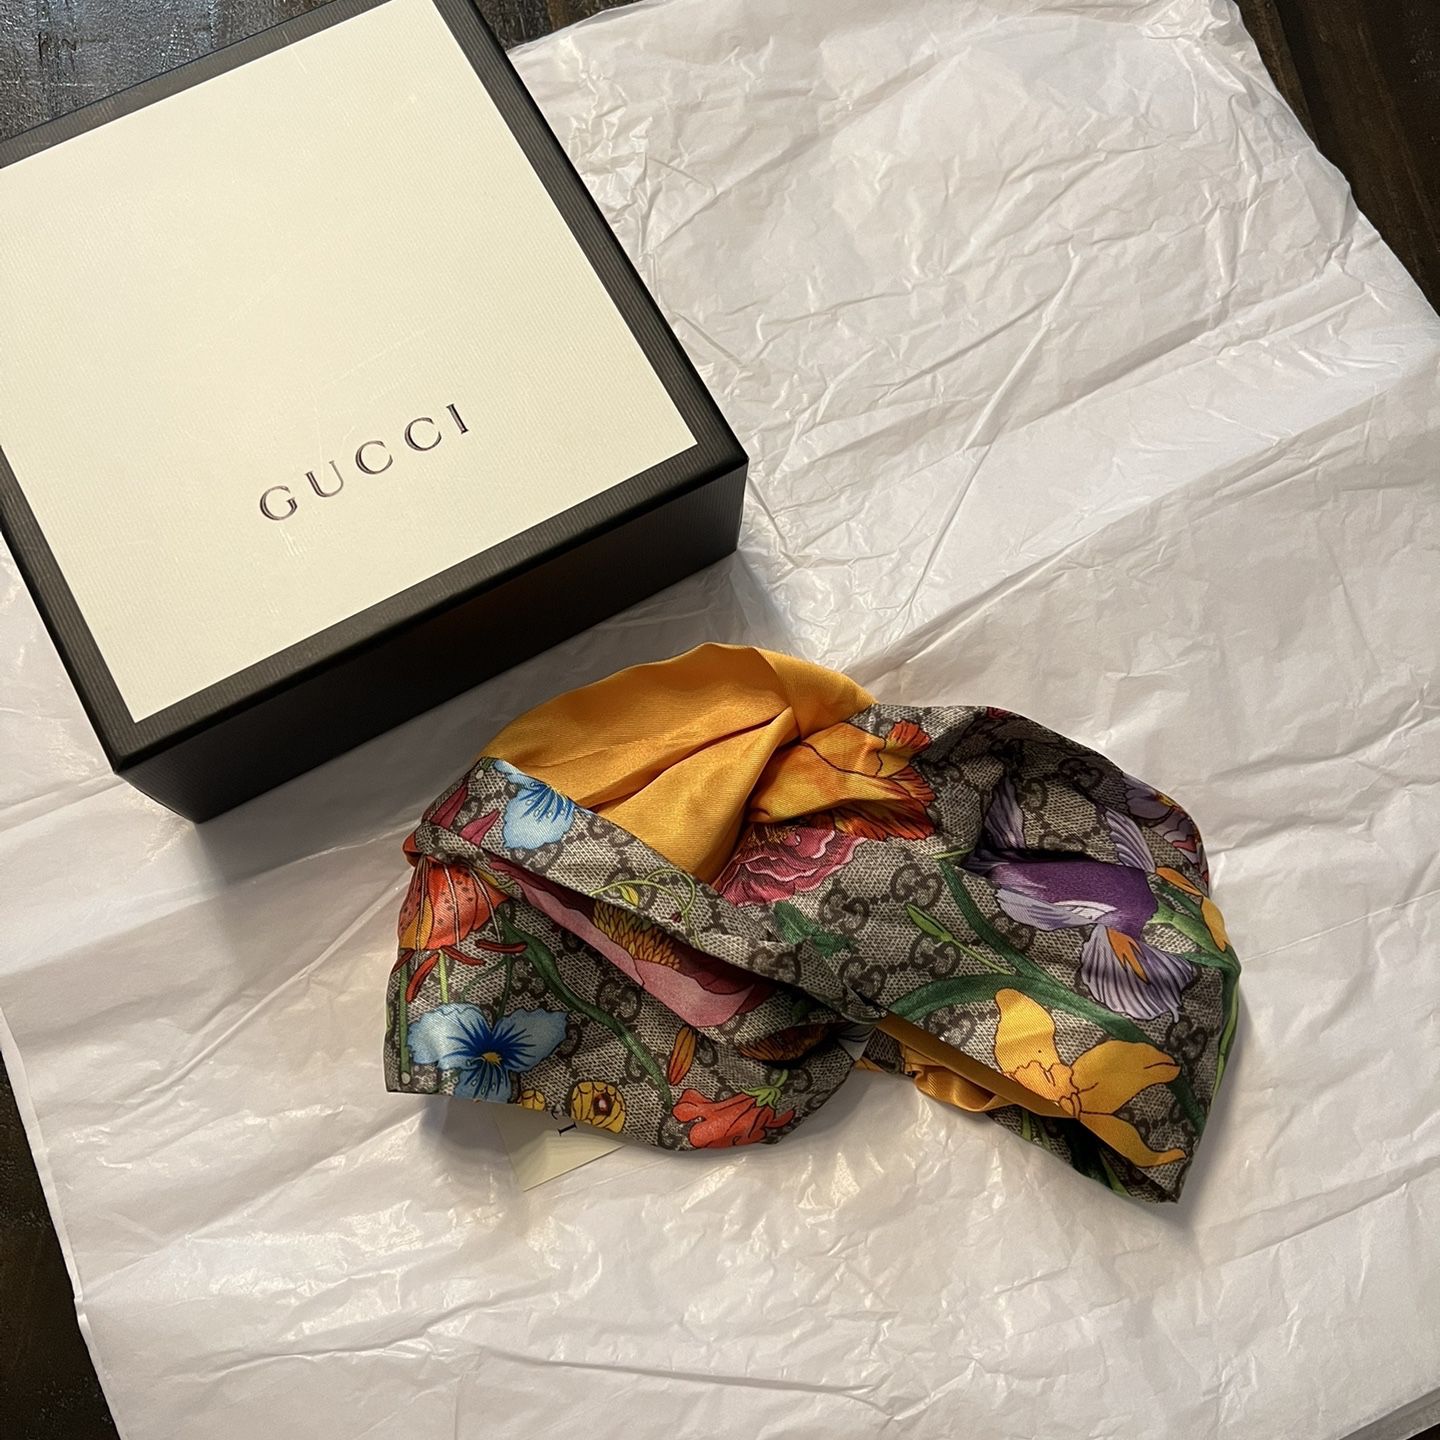 Gucci Headband for Sale in Hilltop Mall, CA - OfferUp